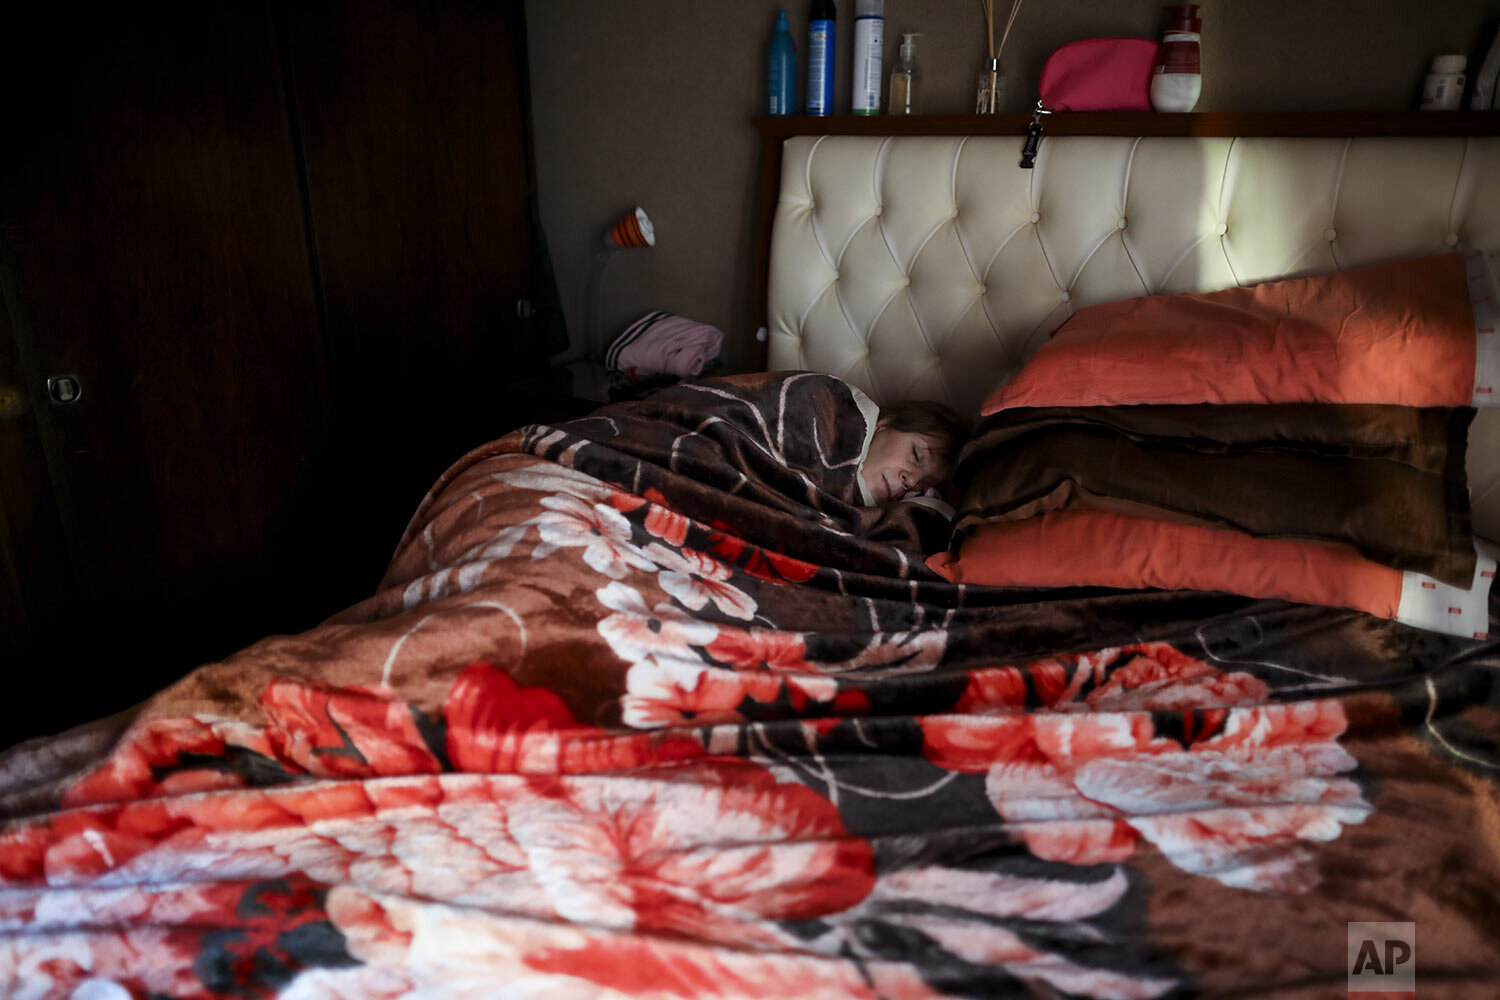  Andrea Cortes, a 49-year-old nurse, rests in her home in Buenos Aires, Argentina, Monday, July 13, 2020, during a government-ordered lockdown to curb the spread of the new coronavirus. (AP Photo/Natacha Pisarenko) 